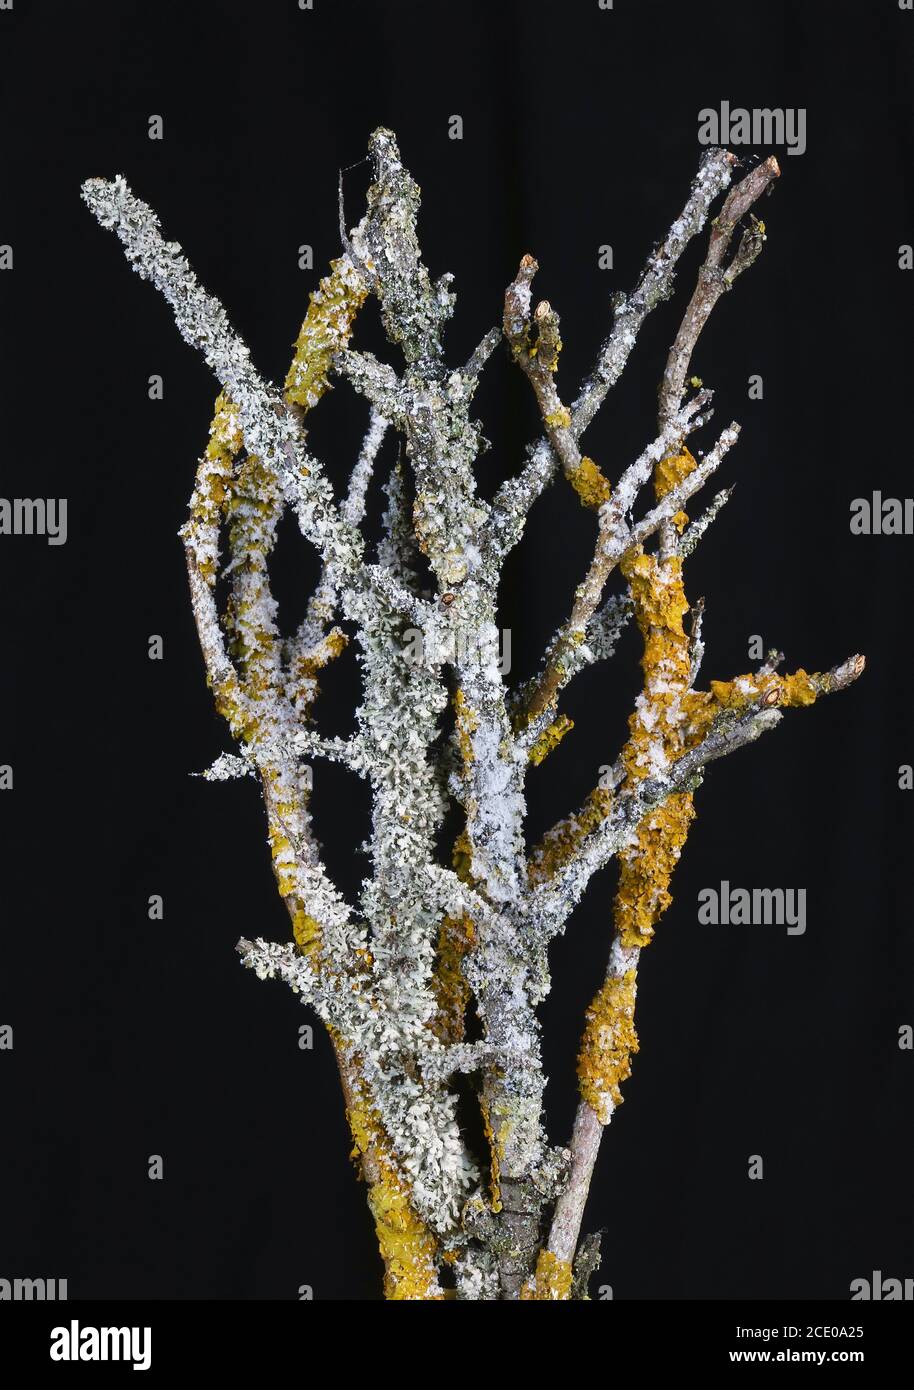 Colonies of yellow and gray lichen grow on forest branches isolated on black Stock Photo